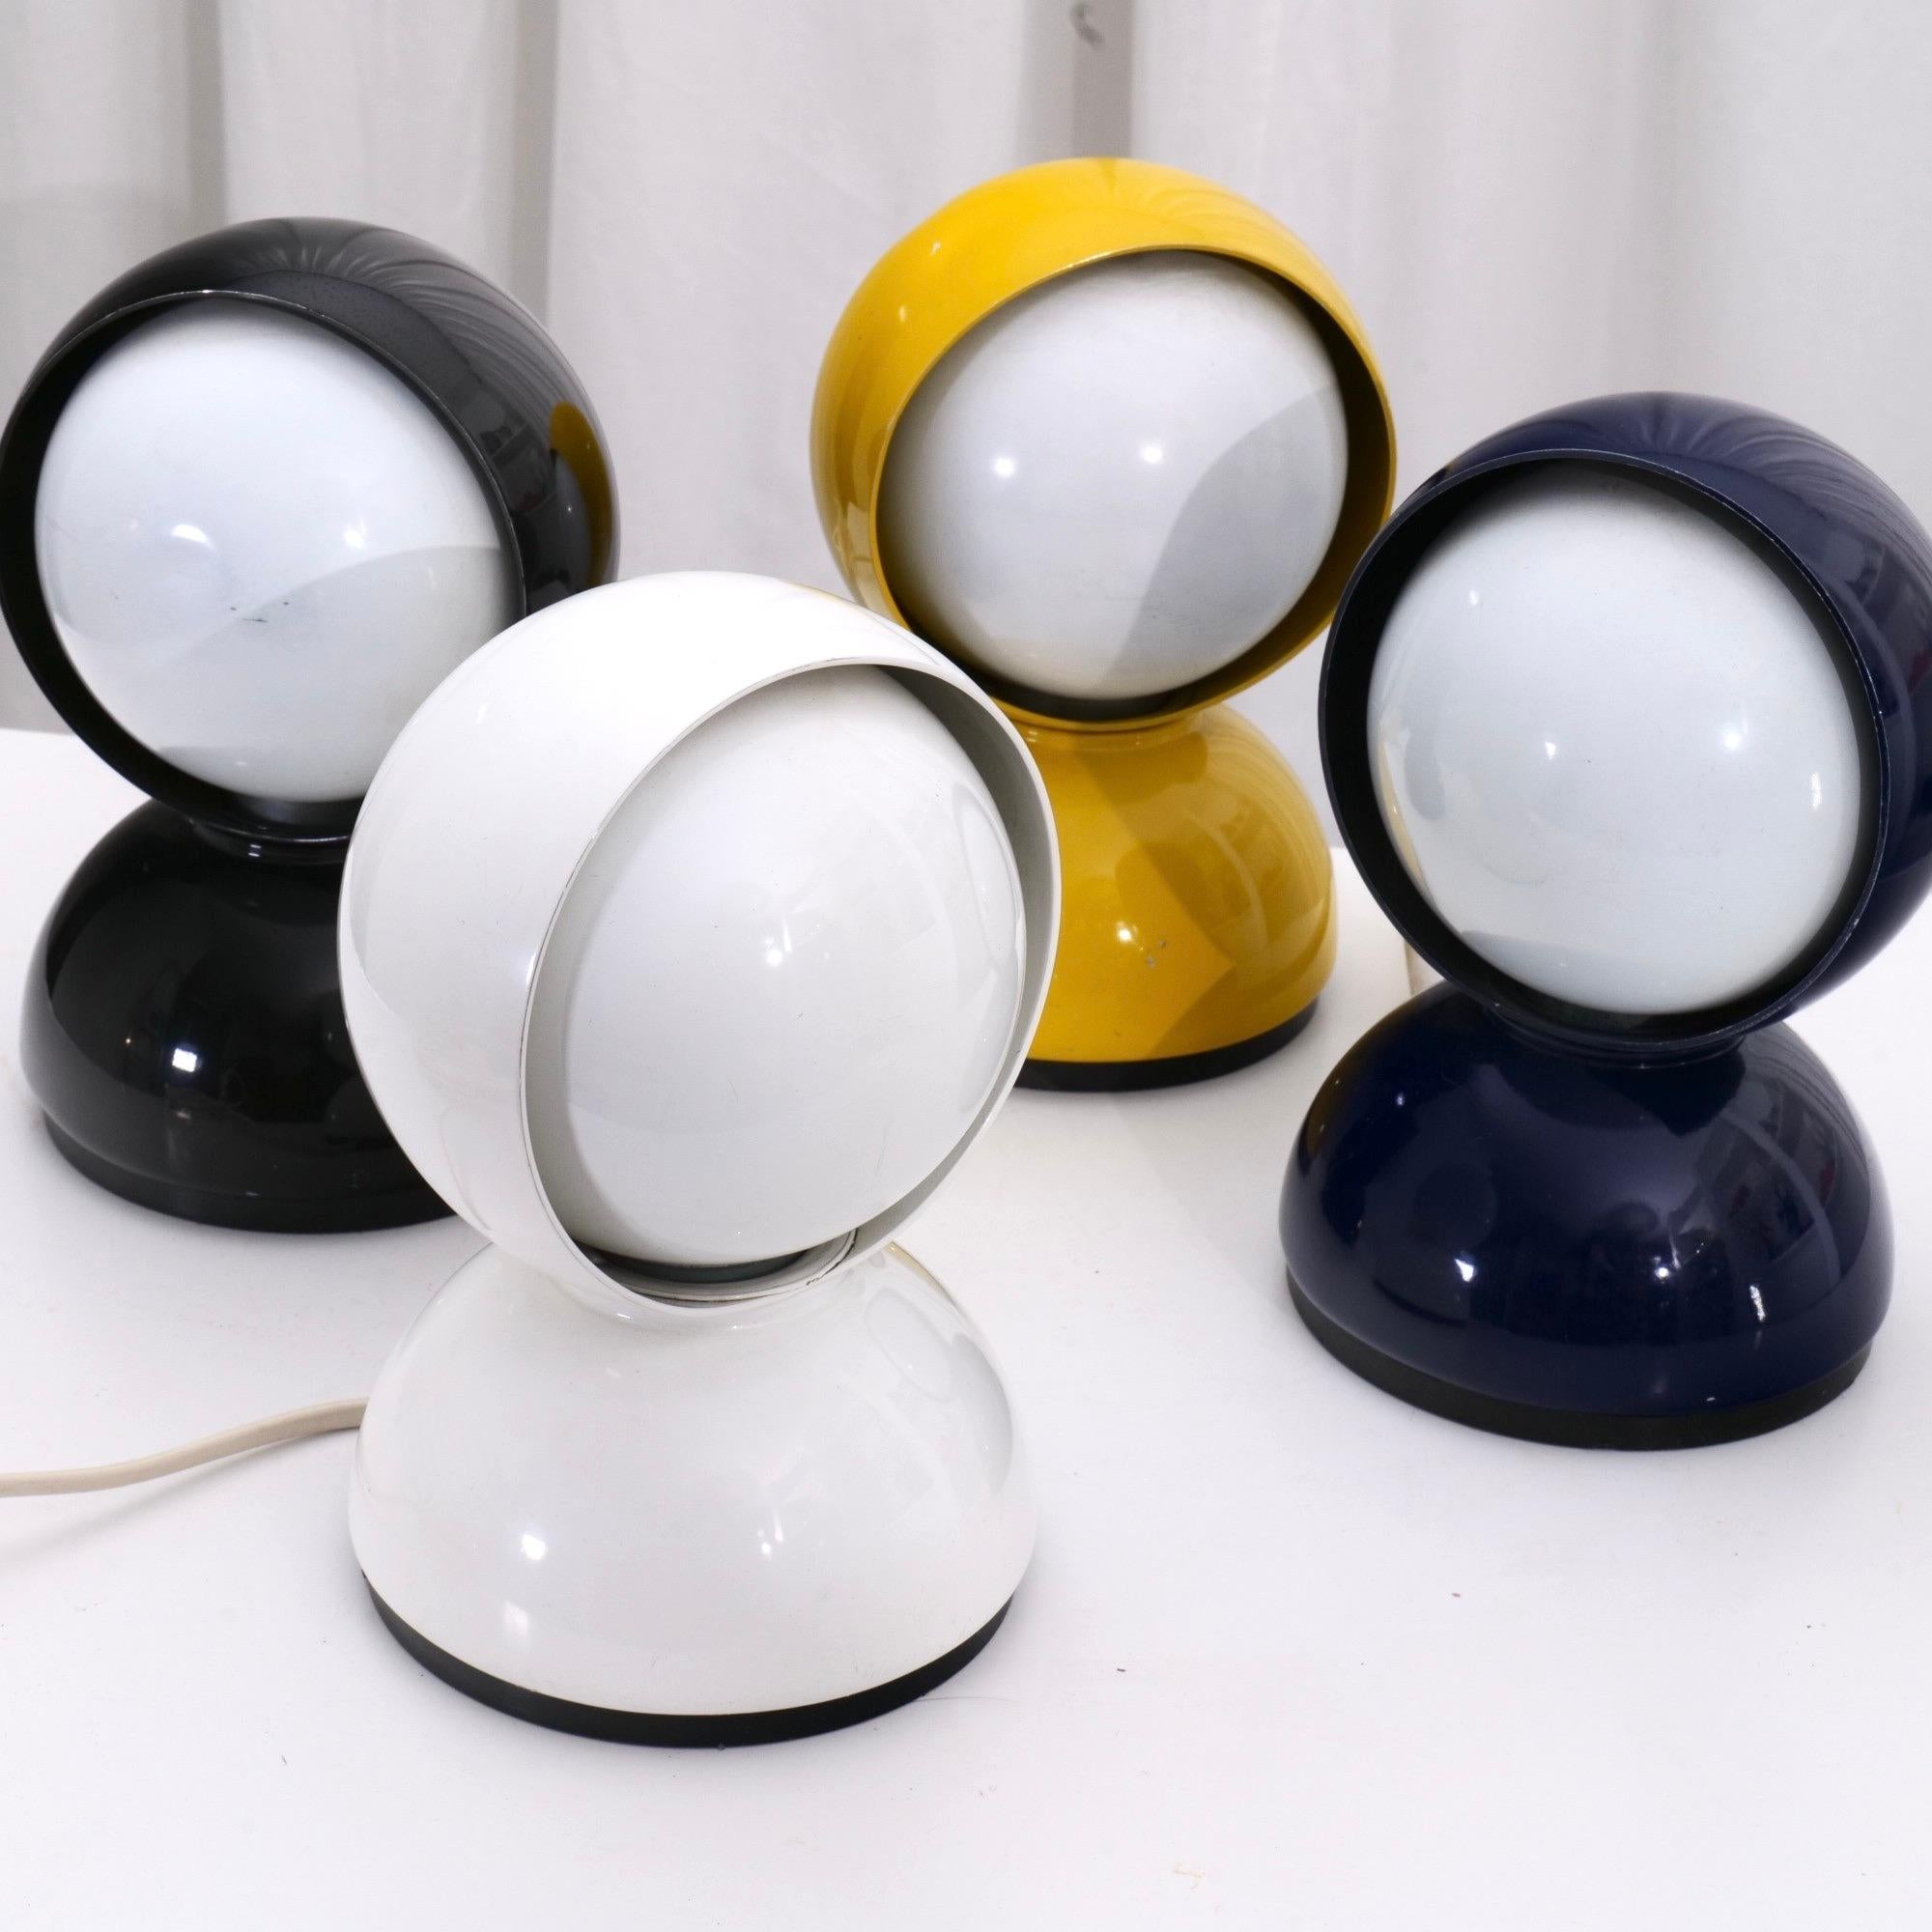 collection of 4 lamps in 4 rare and most desirable colours:
black, blue ,white , yellow

Original vintage designer lamps by Vico Magistretti for Artemide - Italy.
Design Award lamps designed by Vico Magistretti 1965.
Compasso D'Oro design